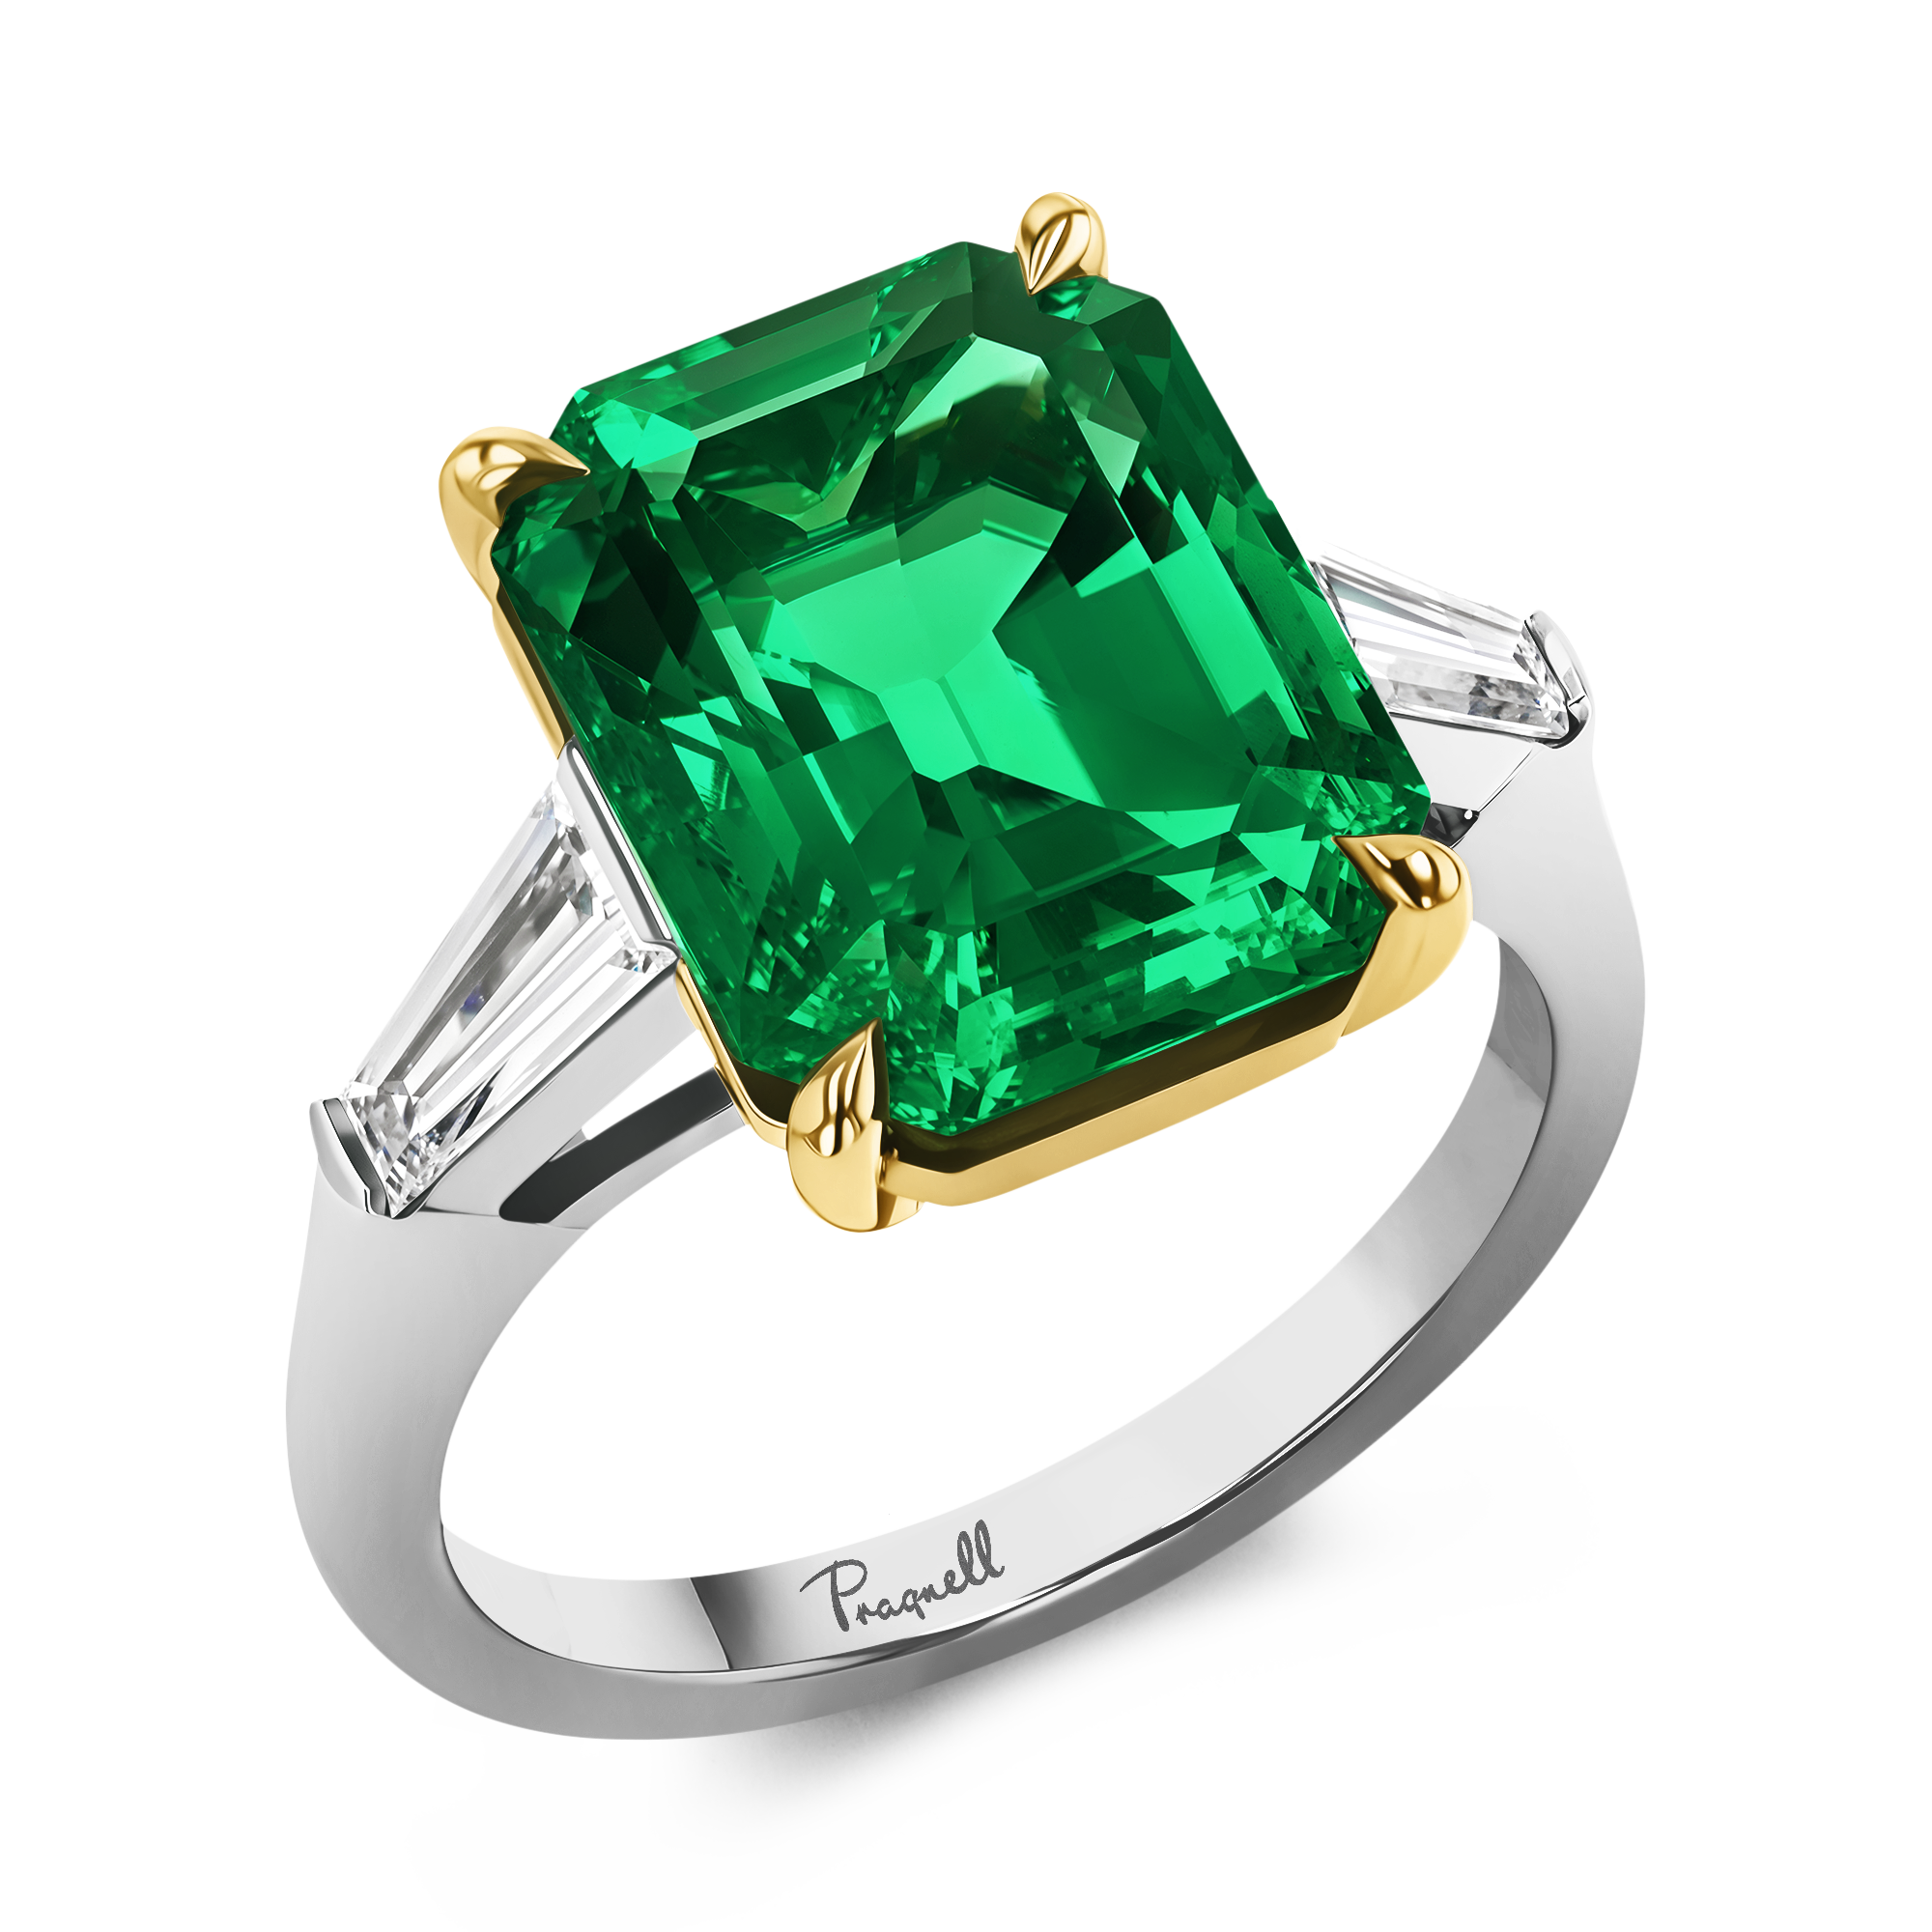 Masterpiece Regency 5.95ct Colombian Emerald and Diamond Ring Octagonal, Cut, Claw Set_1